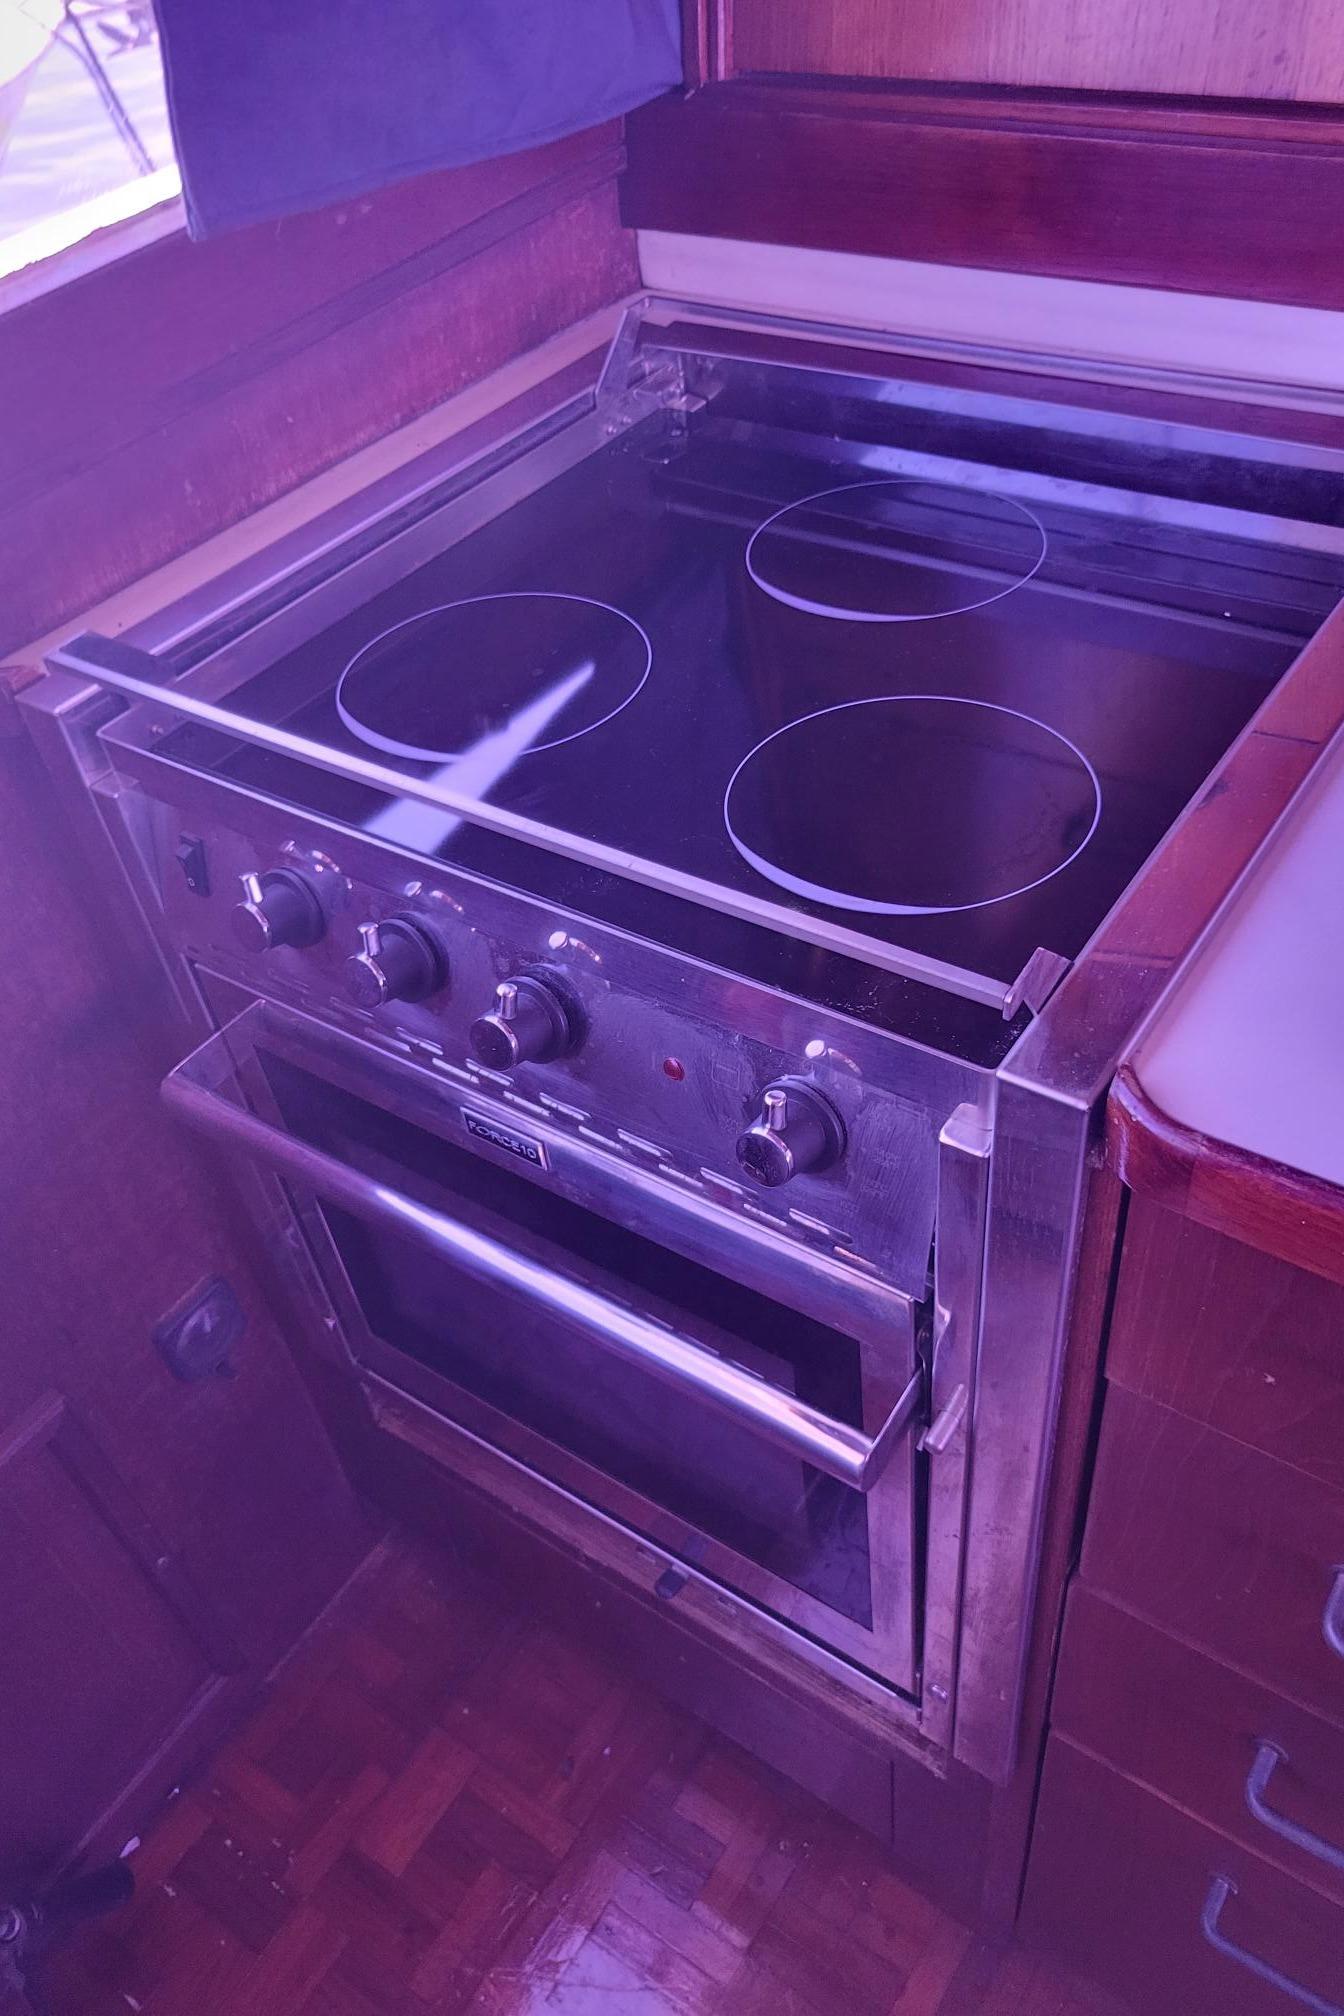 New Force 10 Stove and Oven (2021)